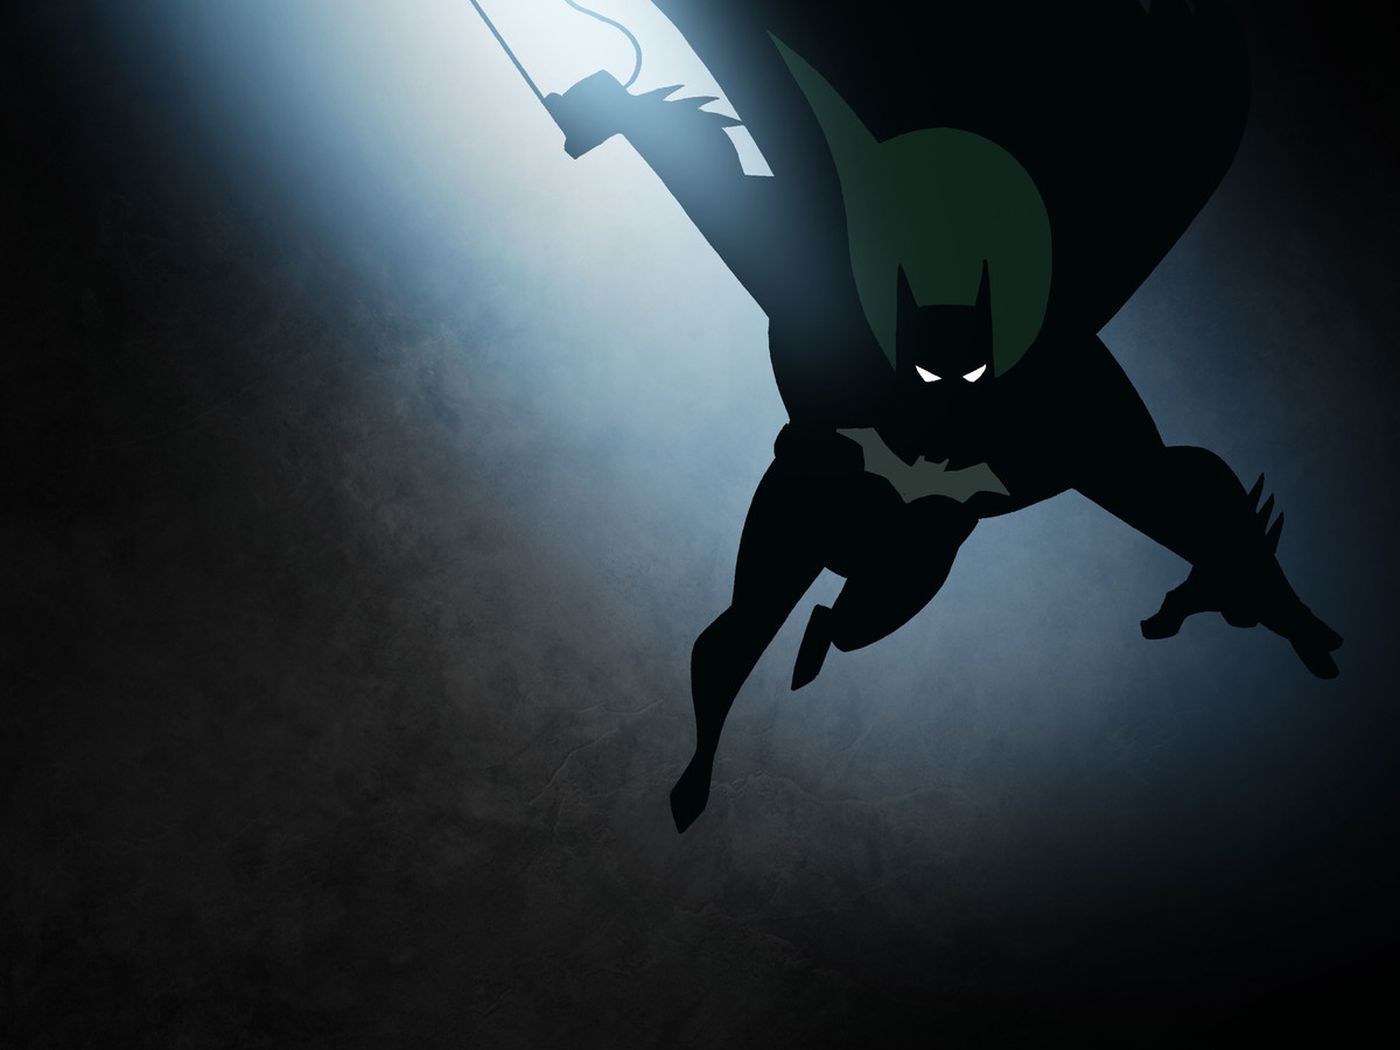 Batman: The Animated Series Wallpapers